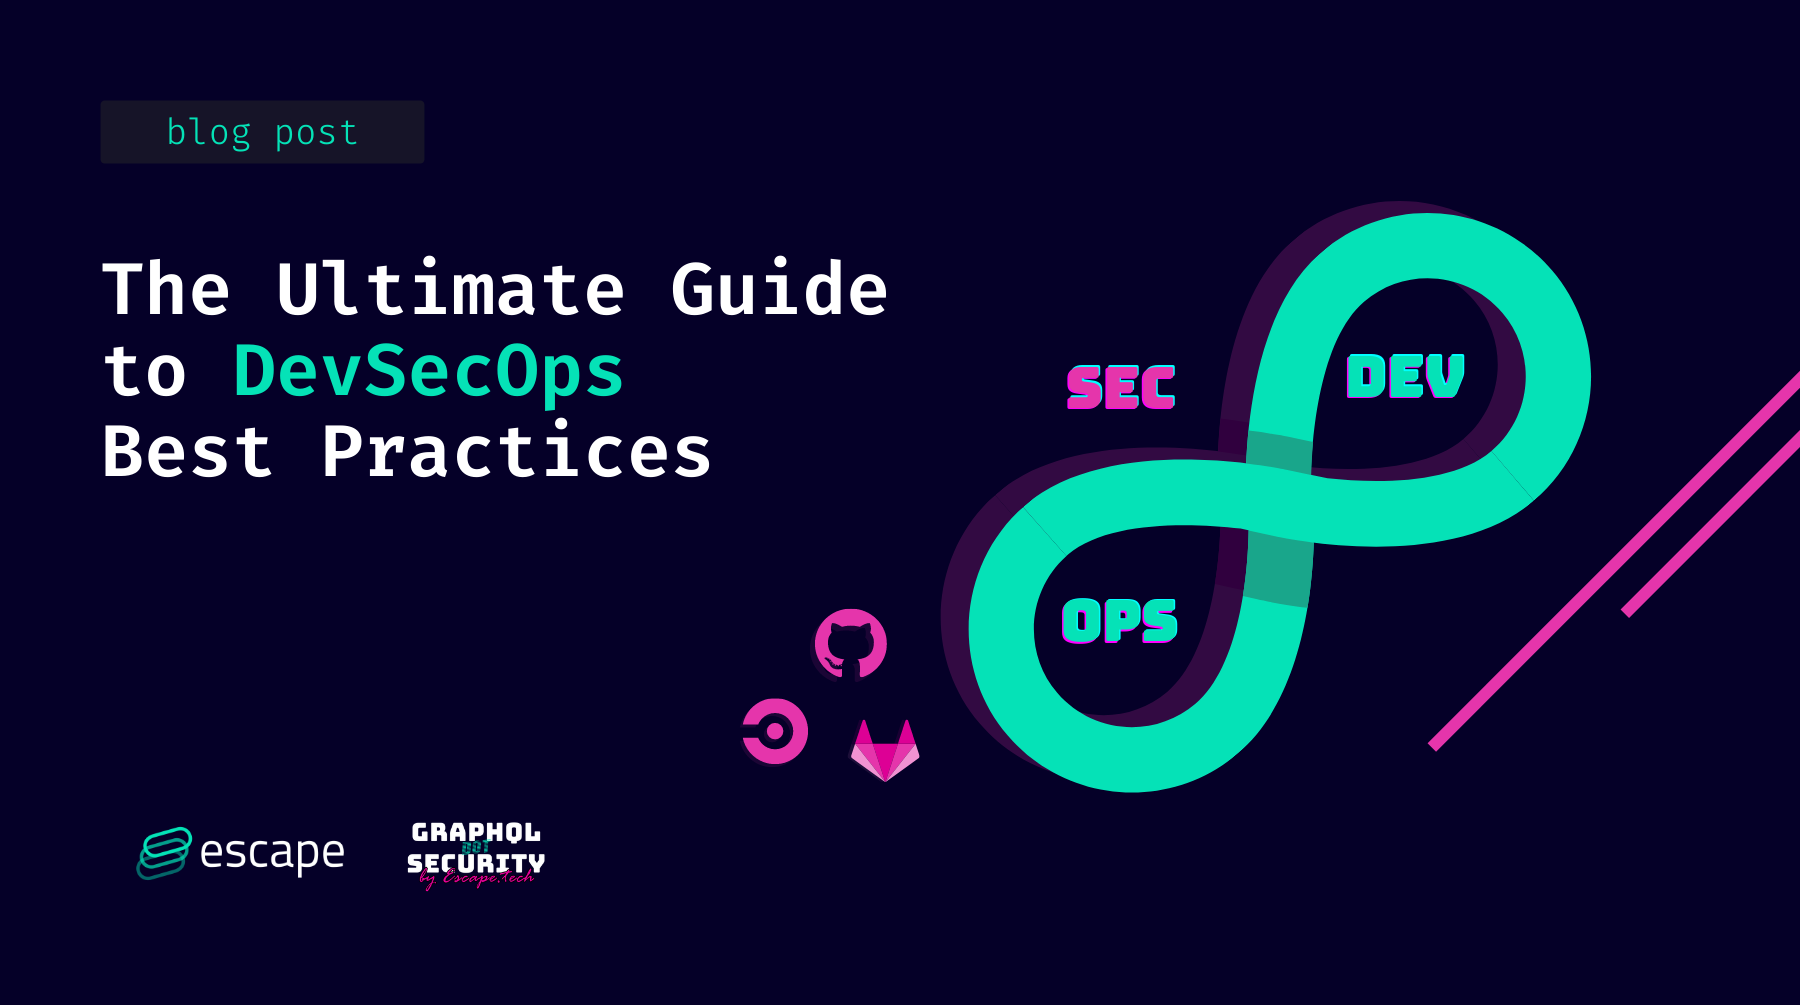 The Ultimate Guide to DevSecOps Best Practices